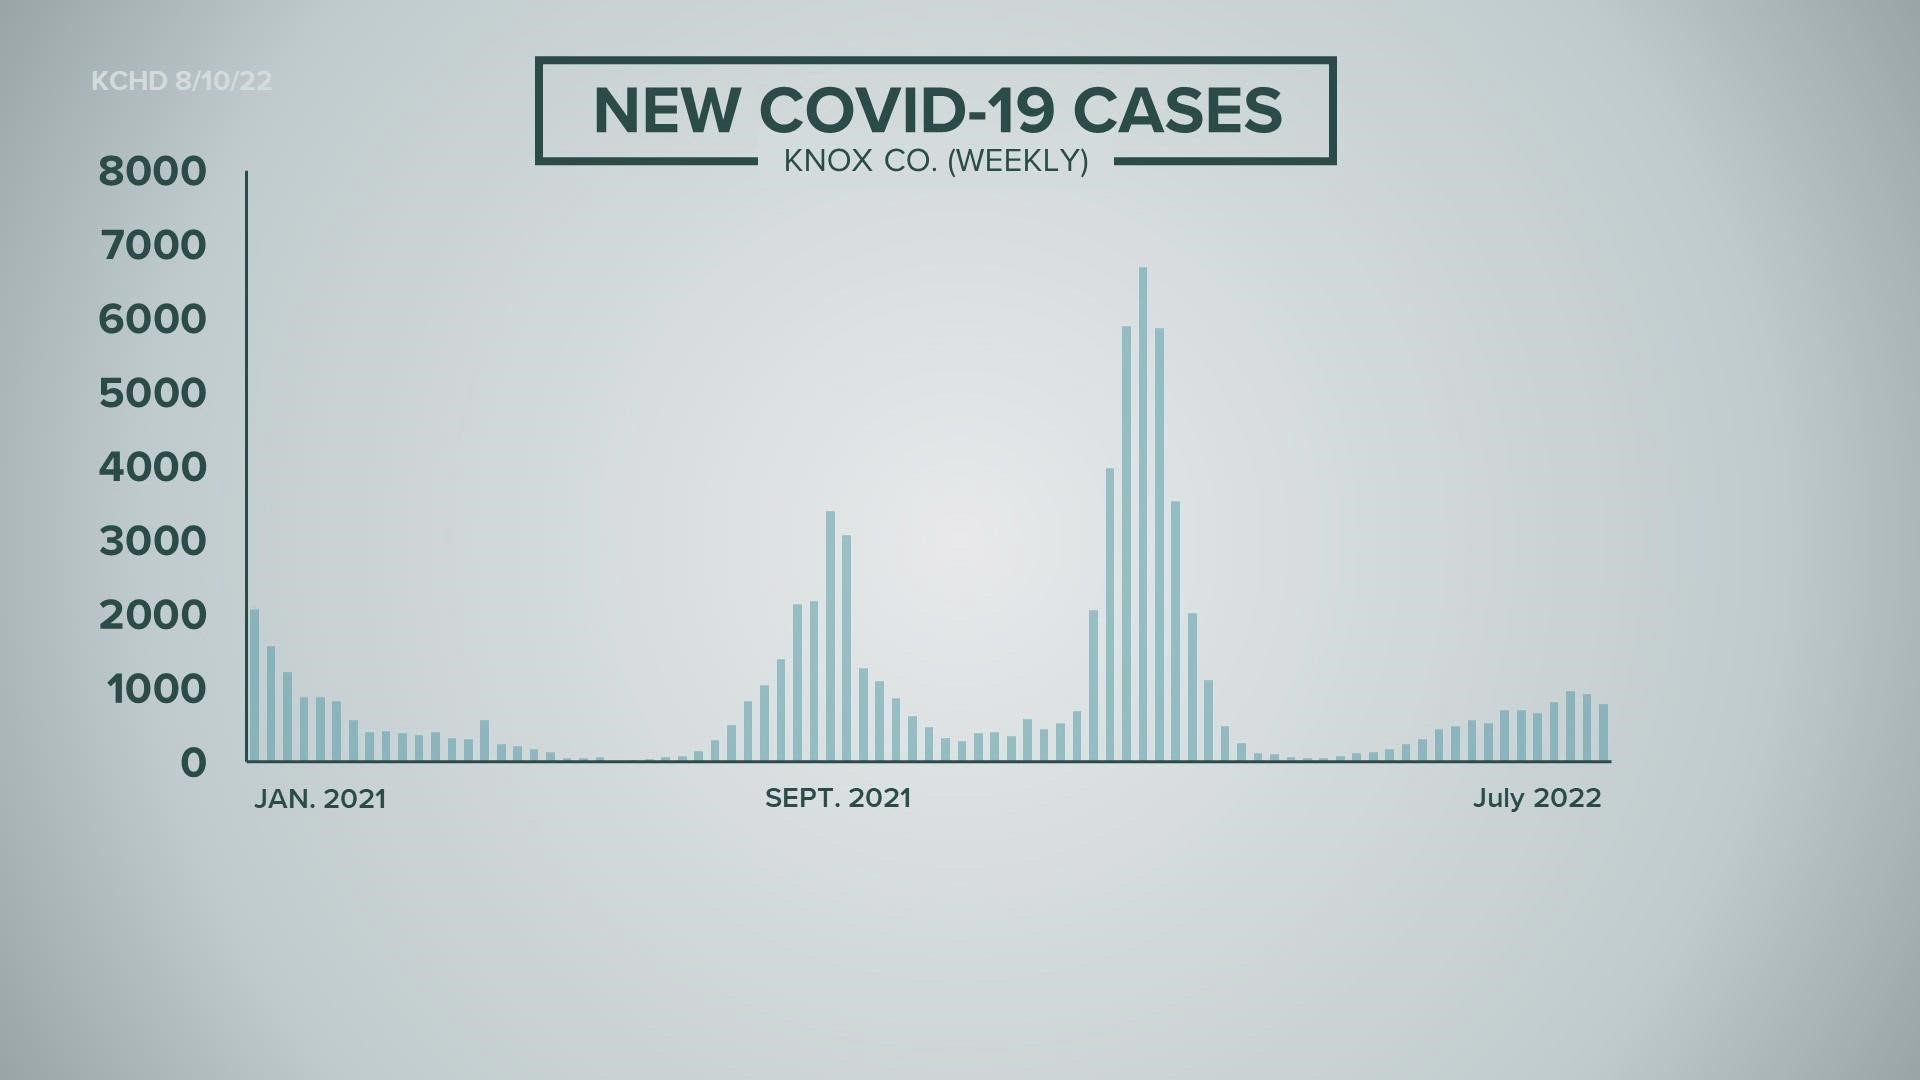 The latest COVID-19 data in Knox County shows a slight dip in case counts.